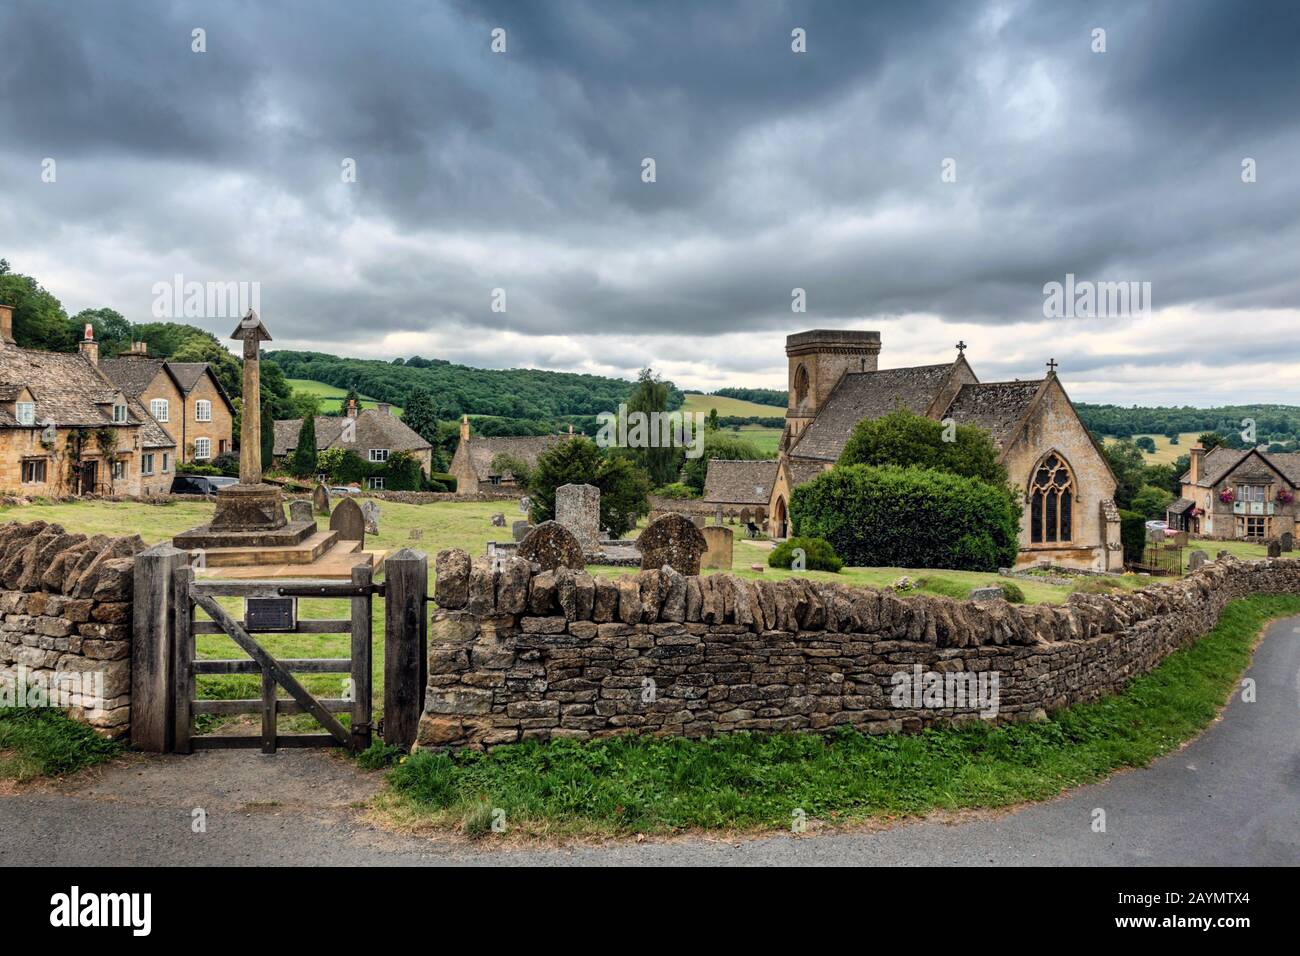 The nineteenth century church of St. Barnabas in the picturesque Cotswold village of Snowshill, Gloucestershire, England, Uk Stock Photo